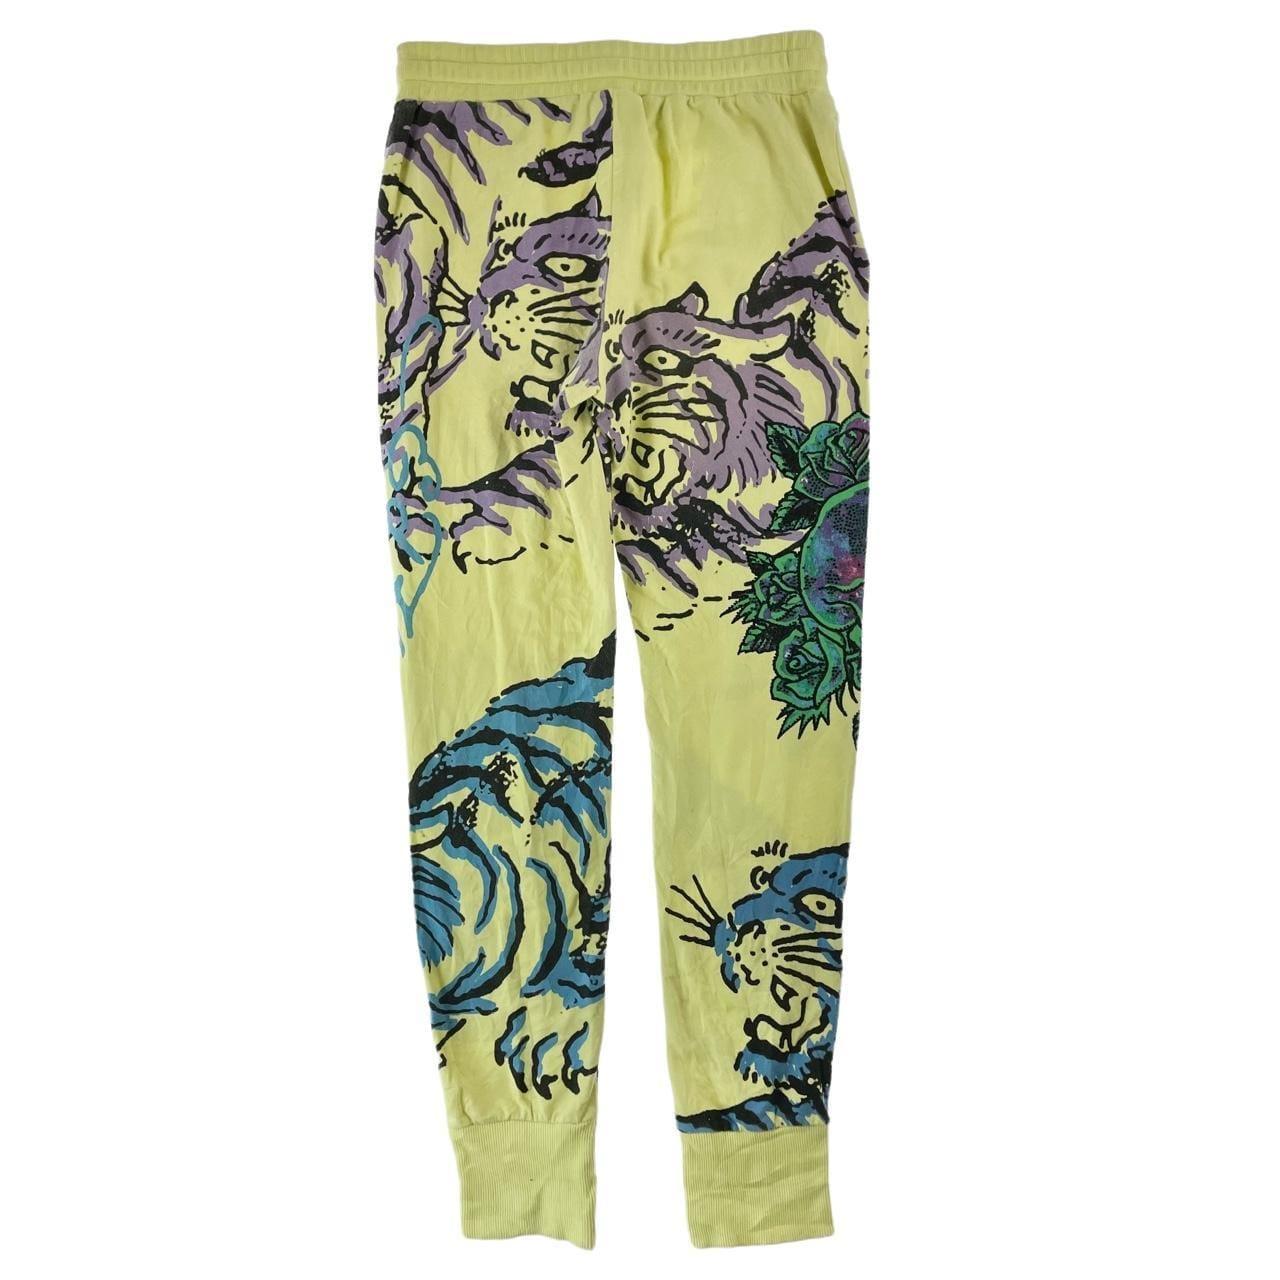 Ed Hardy tiger joggers size S - Known Source